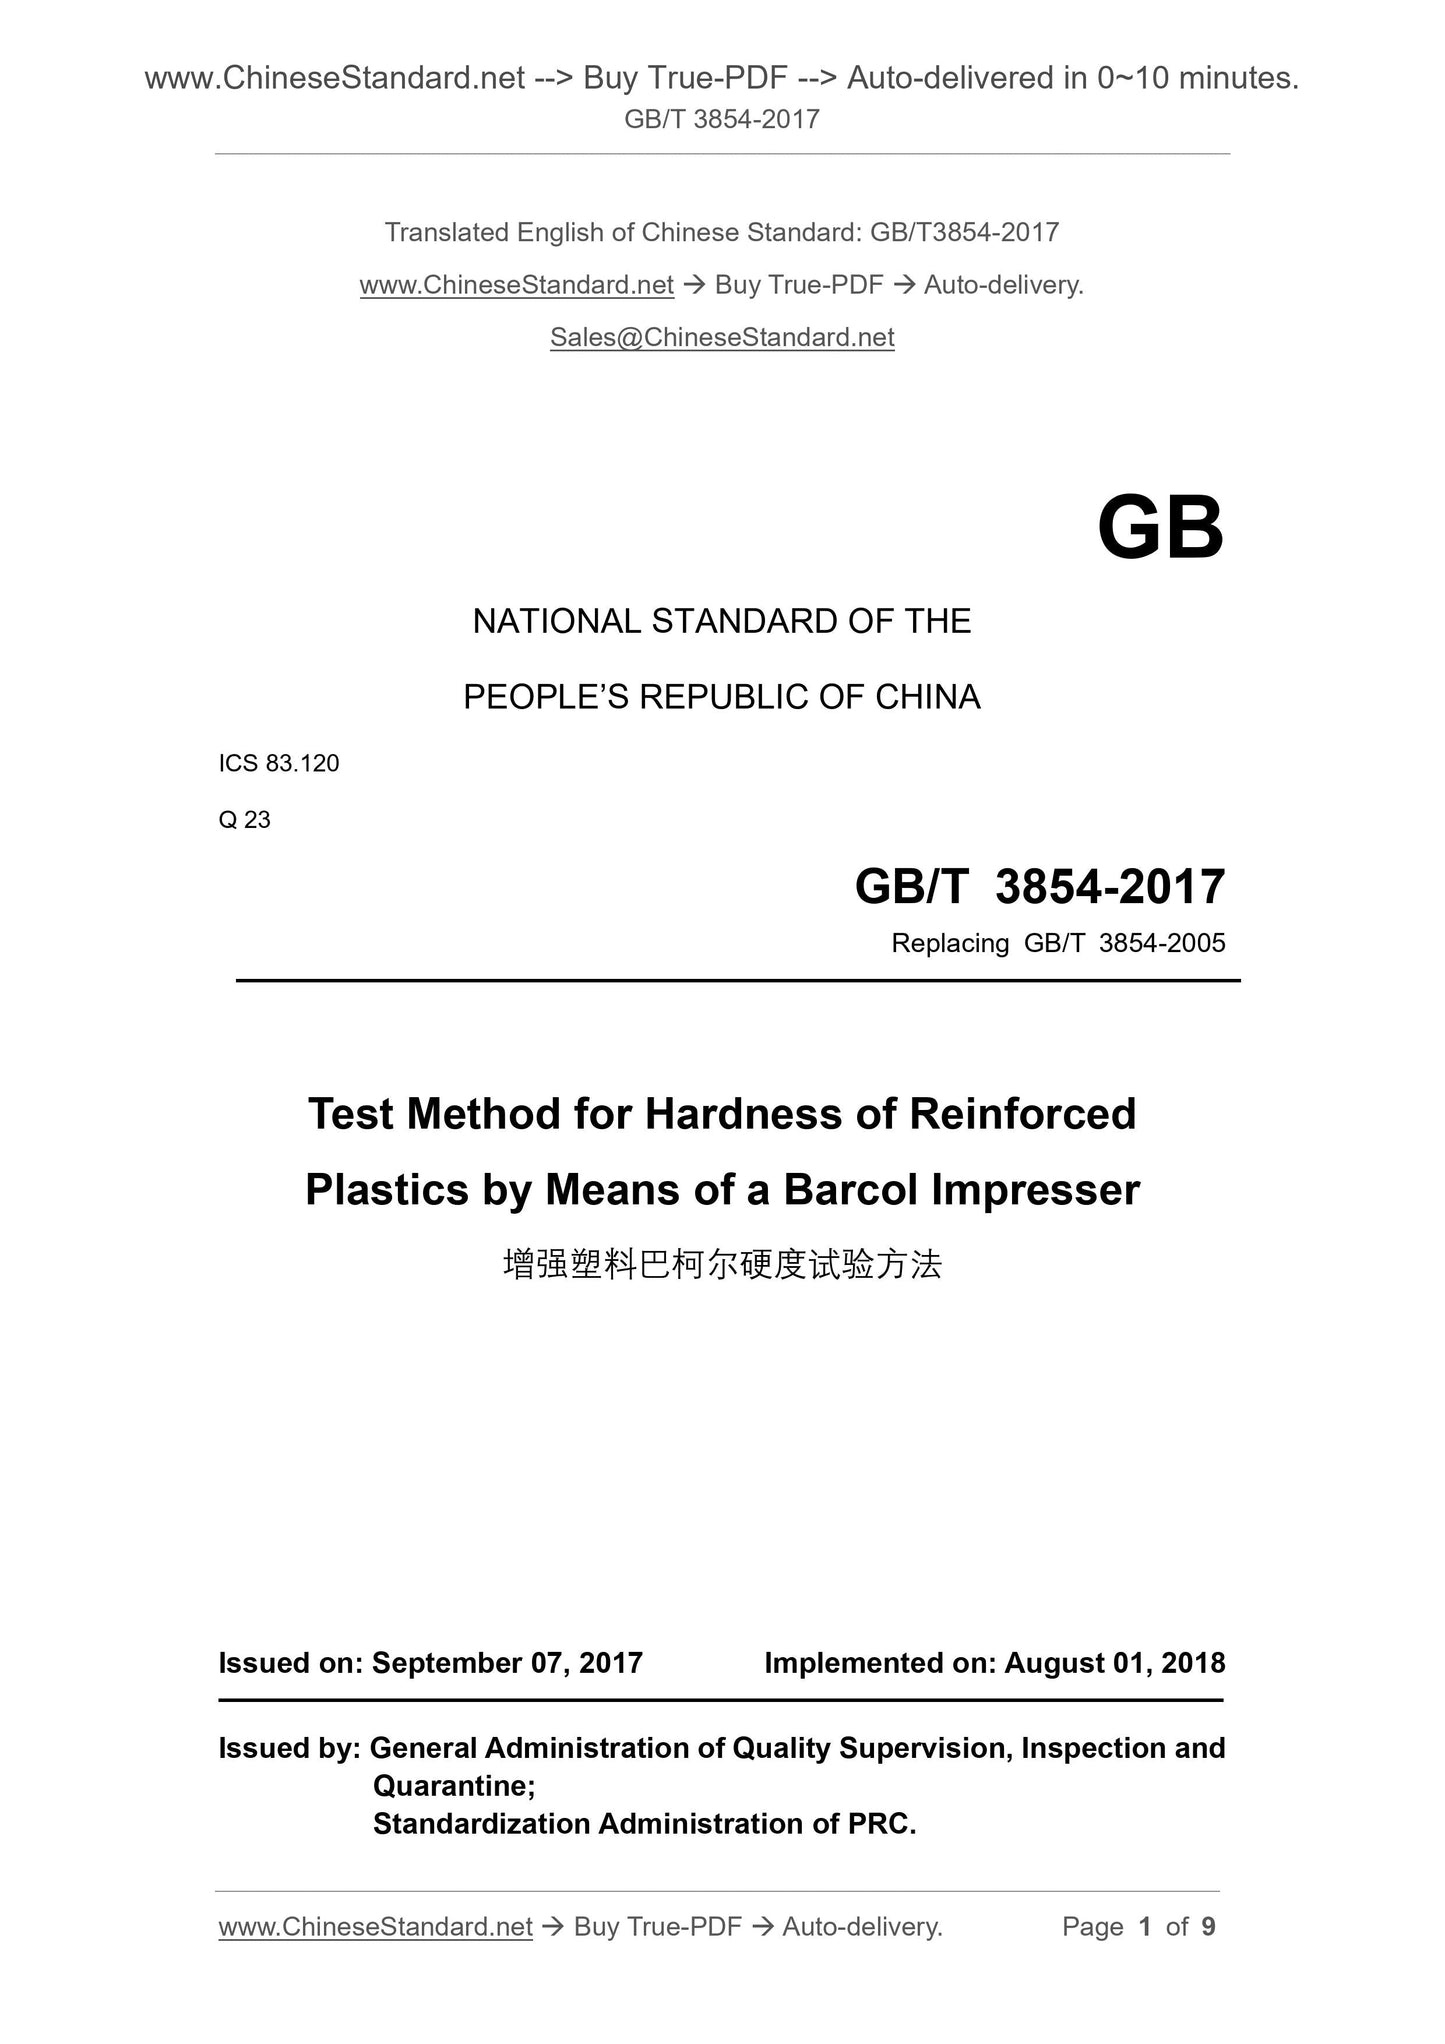 GB/T 3854-2017 Page 1